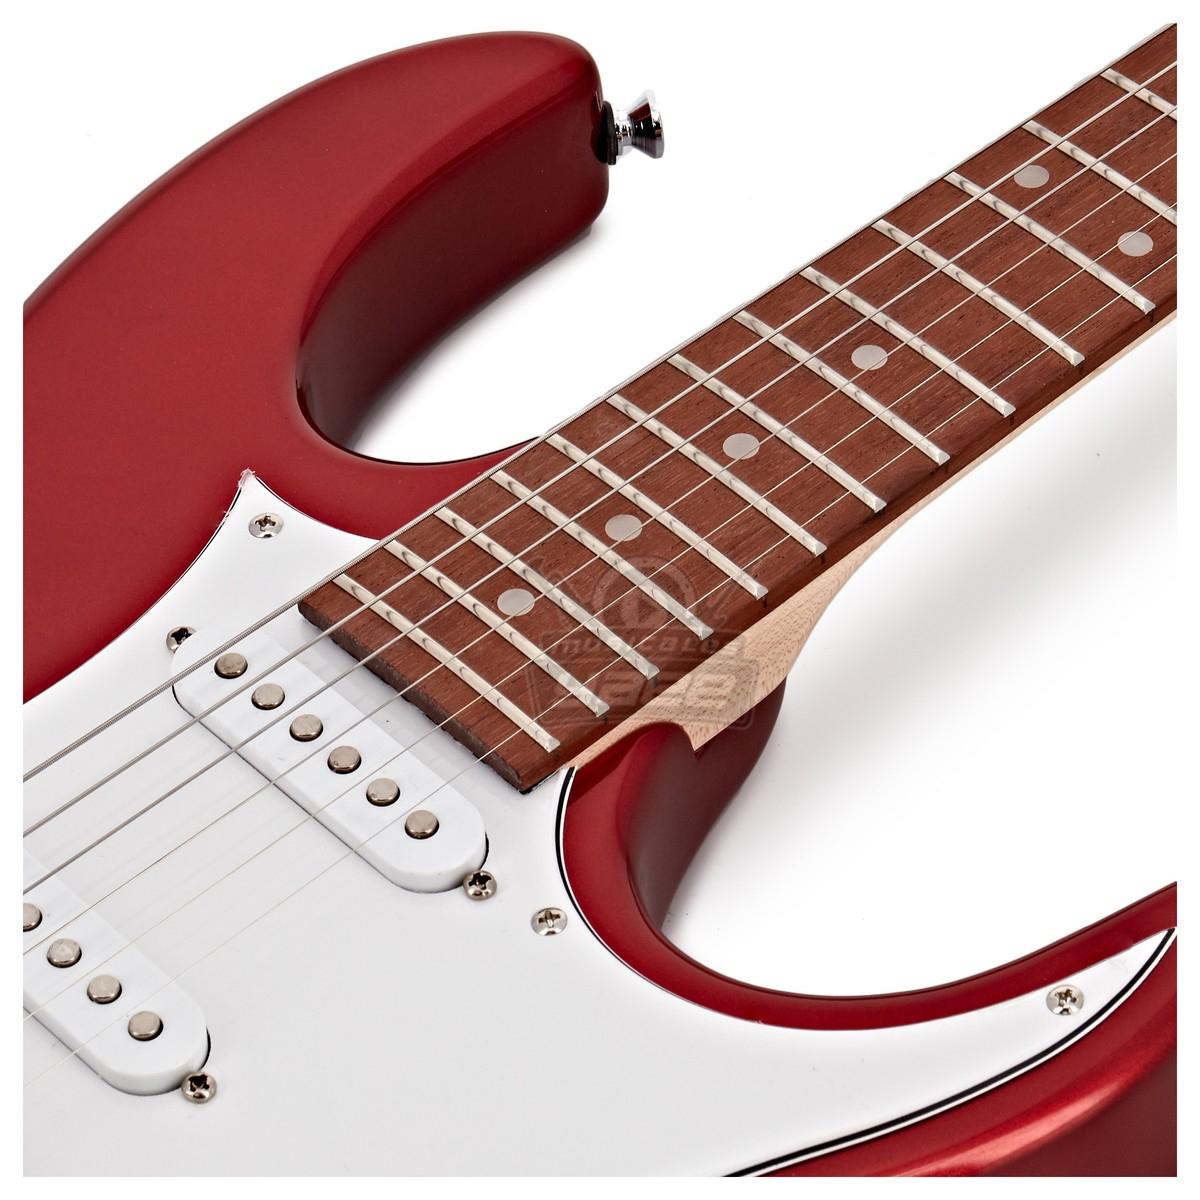 IBANEZ GIO RG GRX40-CA GUITARRA ELECTRICA Candy Apple Red